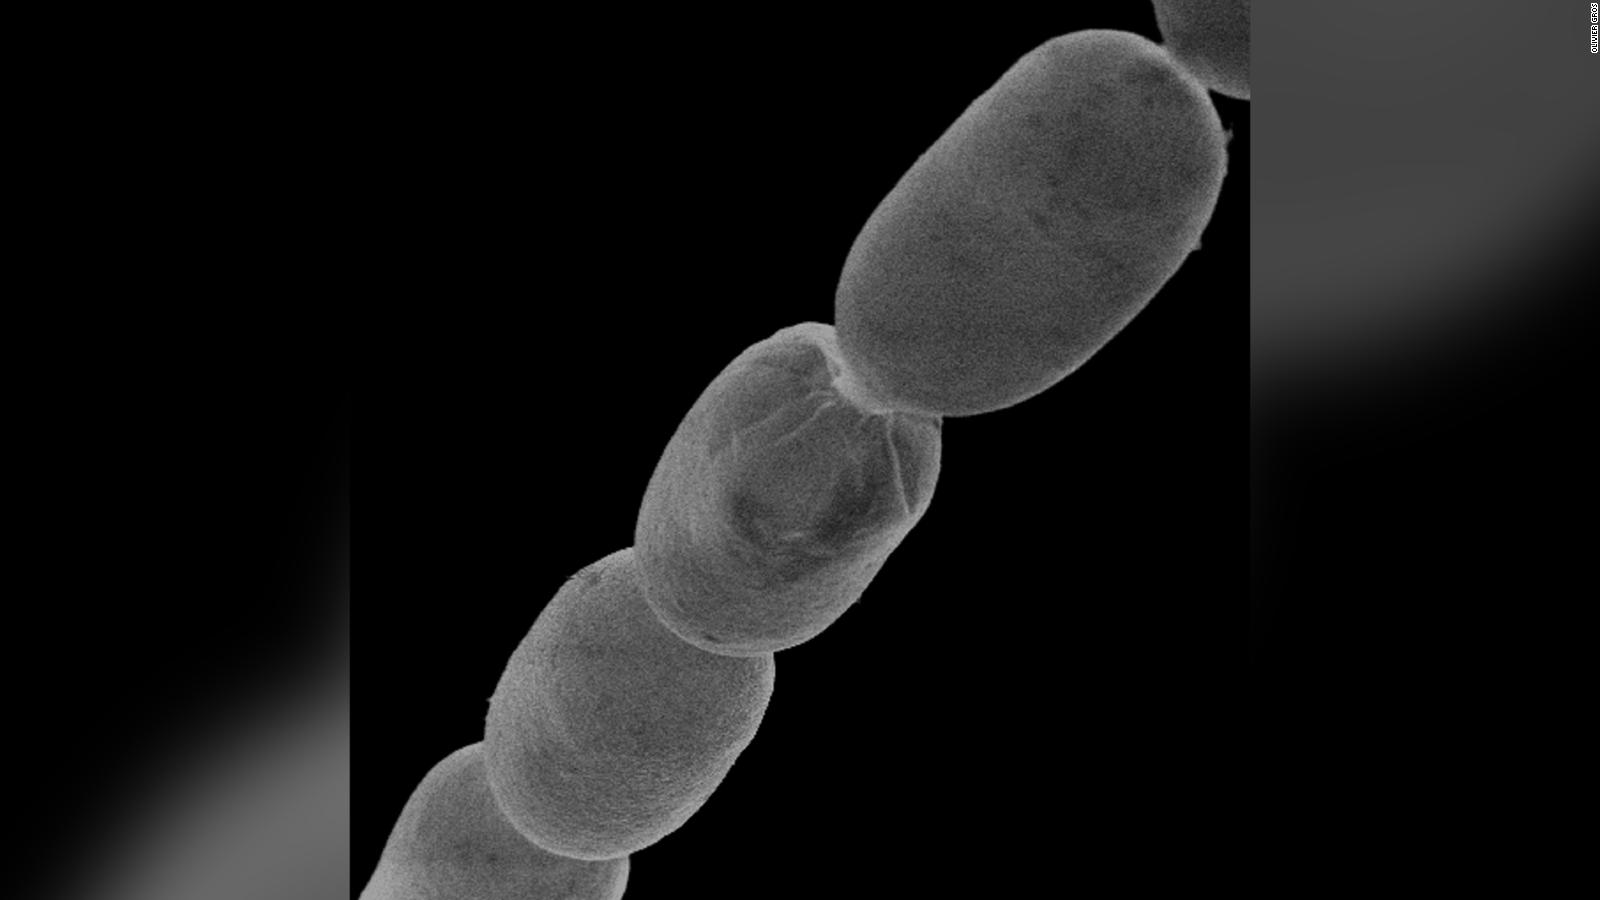 They discover the longest bacterium in the world, the size of a human eyelash